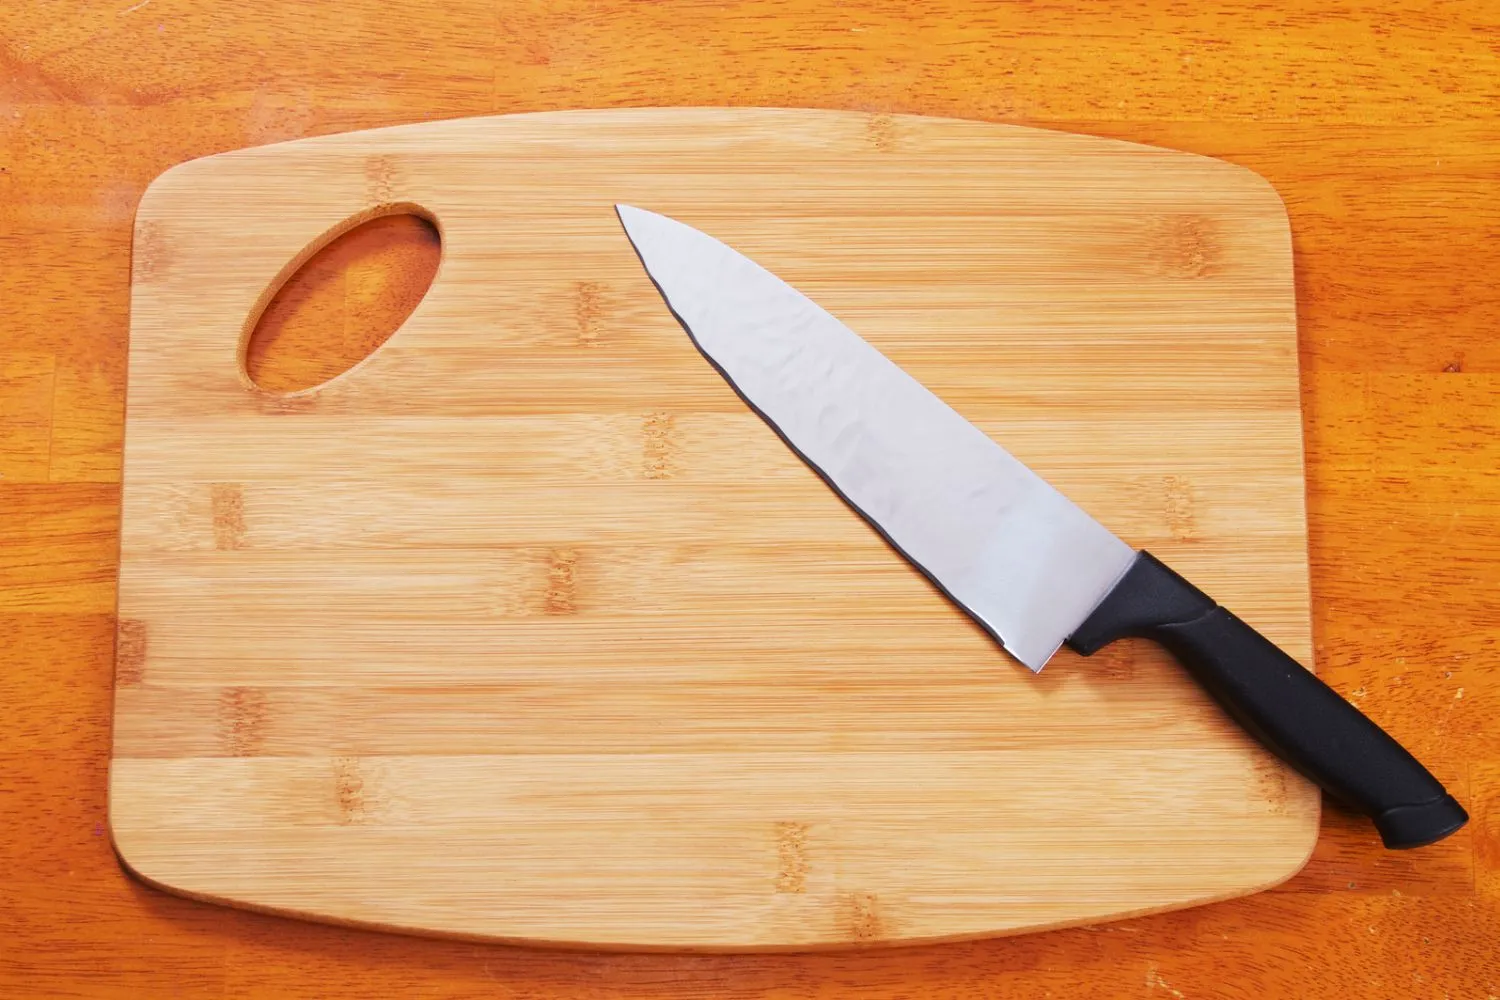 How to Clean and Disinfect Your Cutting Boards Safely and Effectively